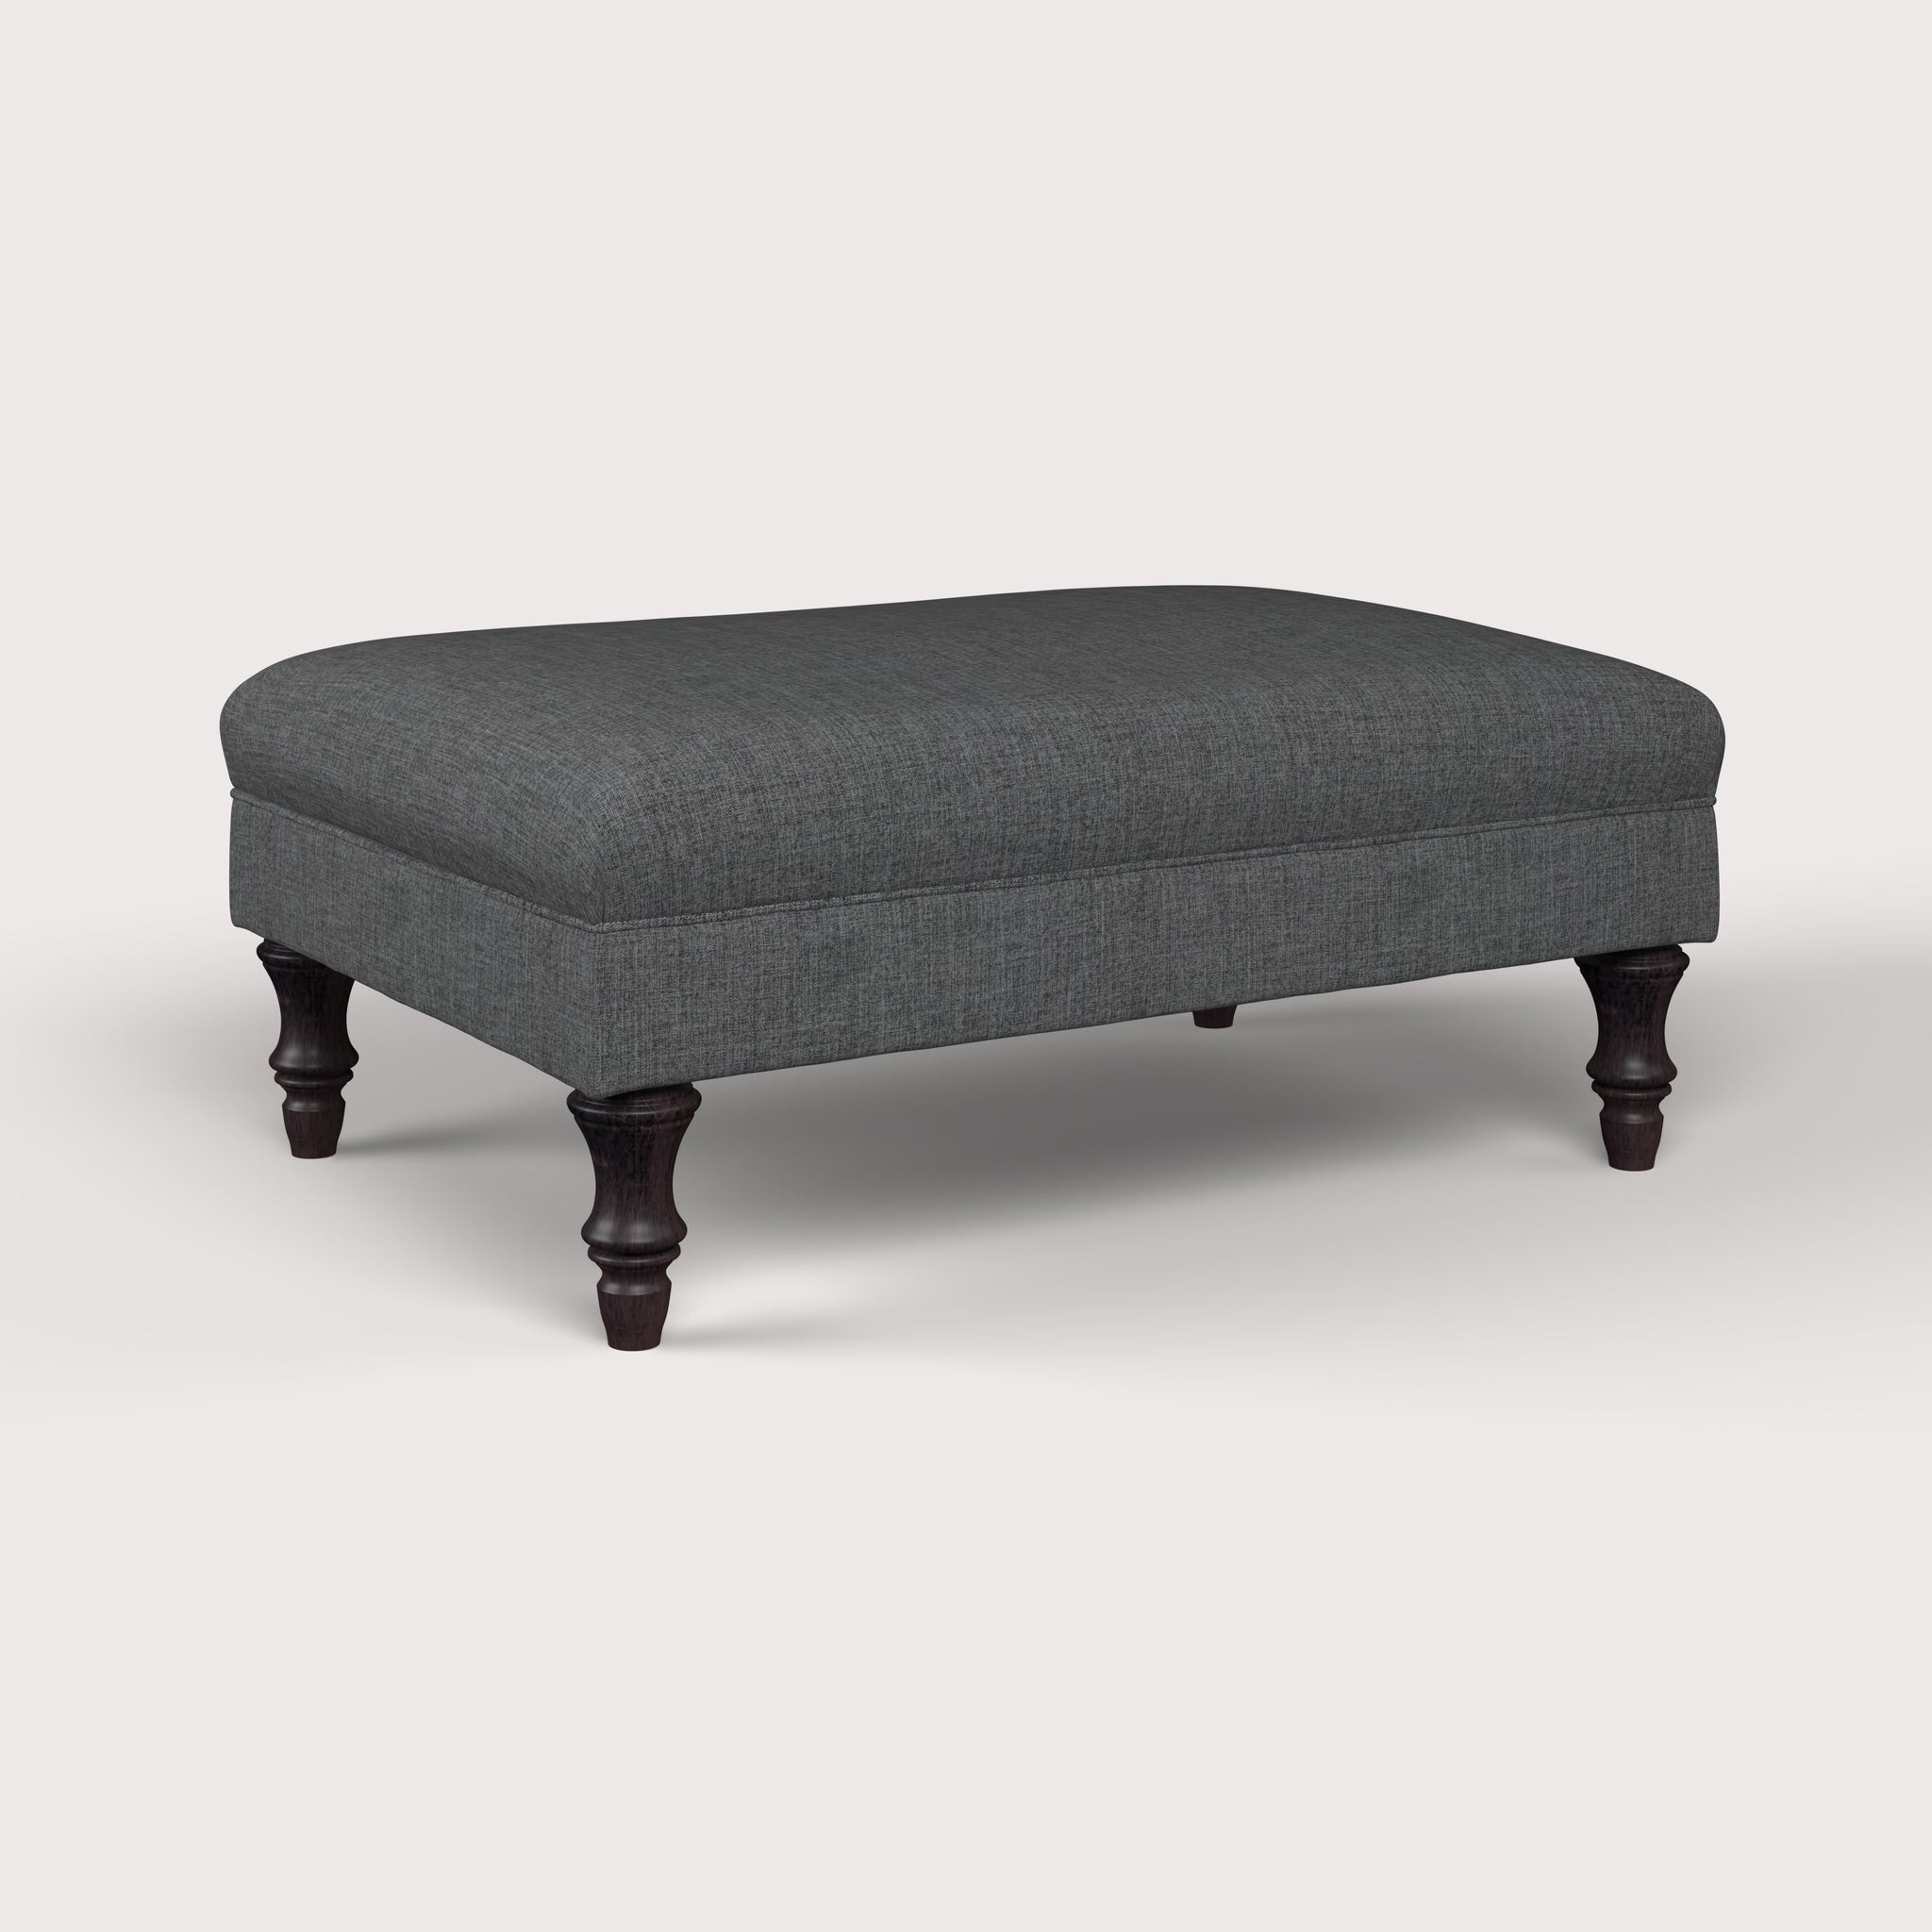 The Potter Footstool - Large